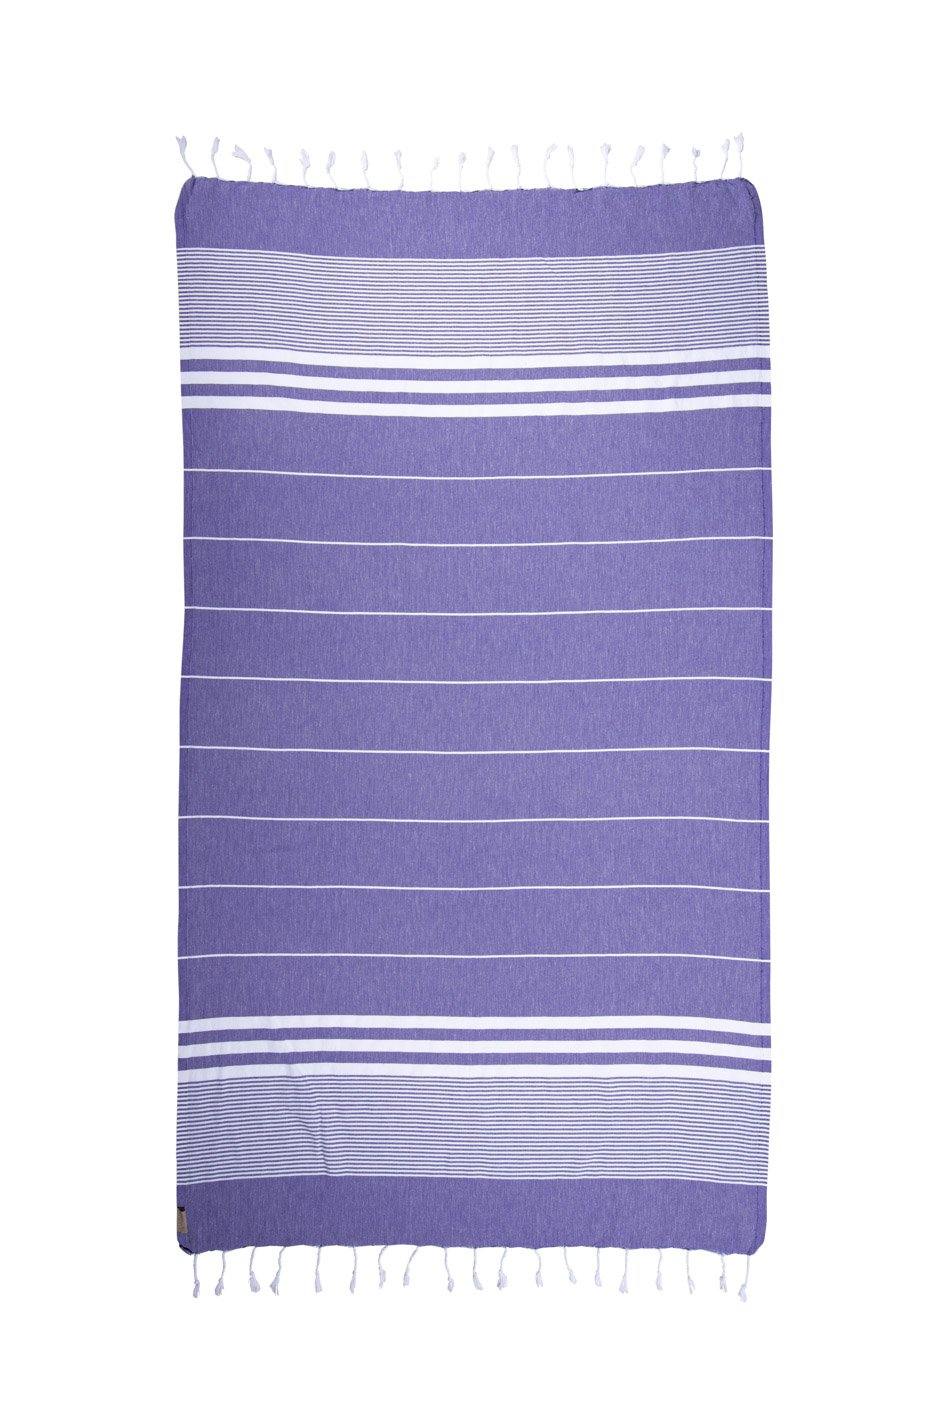 Kali - Purple and White Striped Quick Drying Towel Full Length